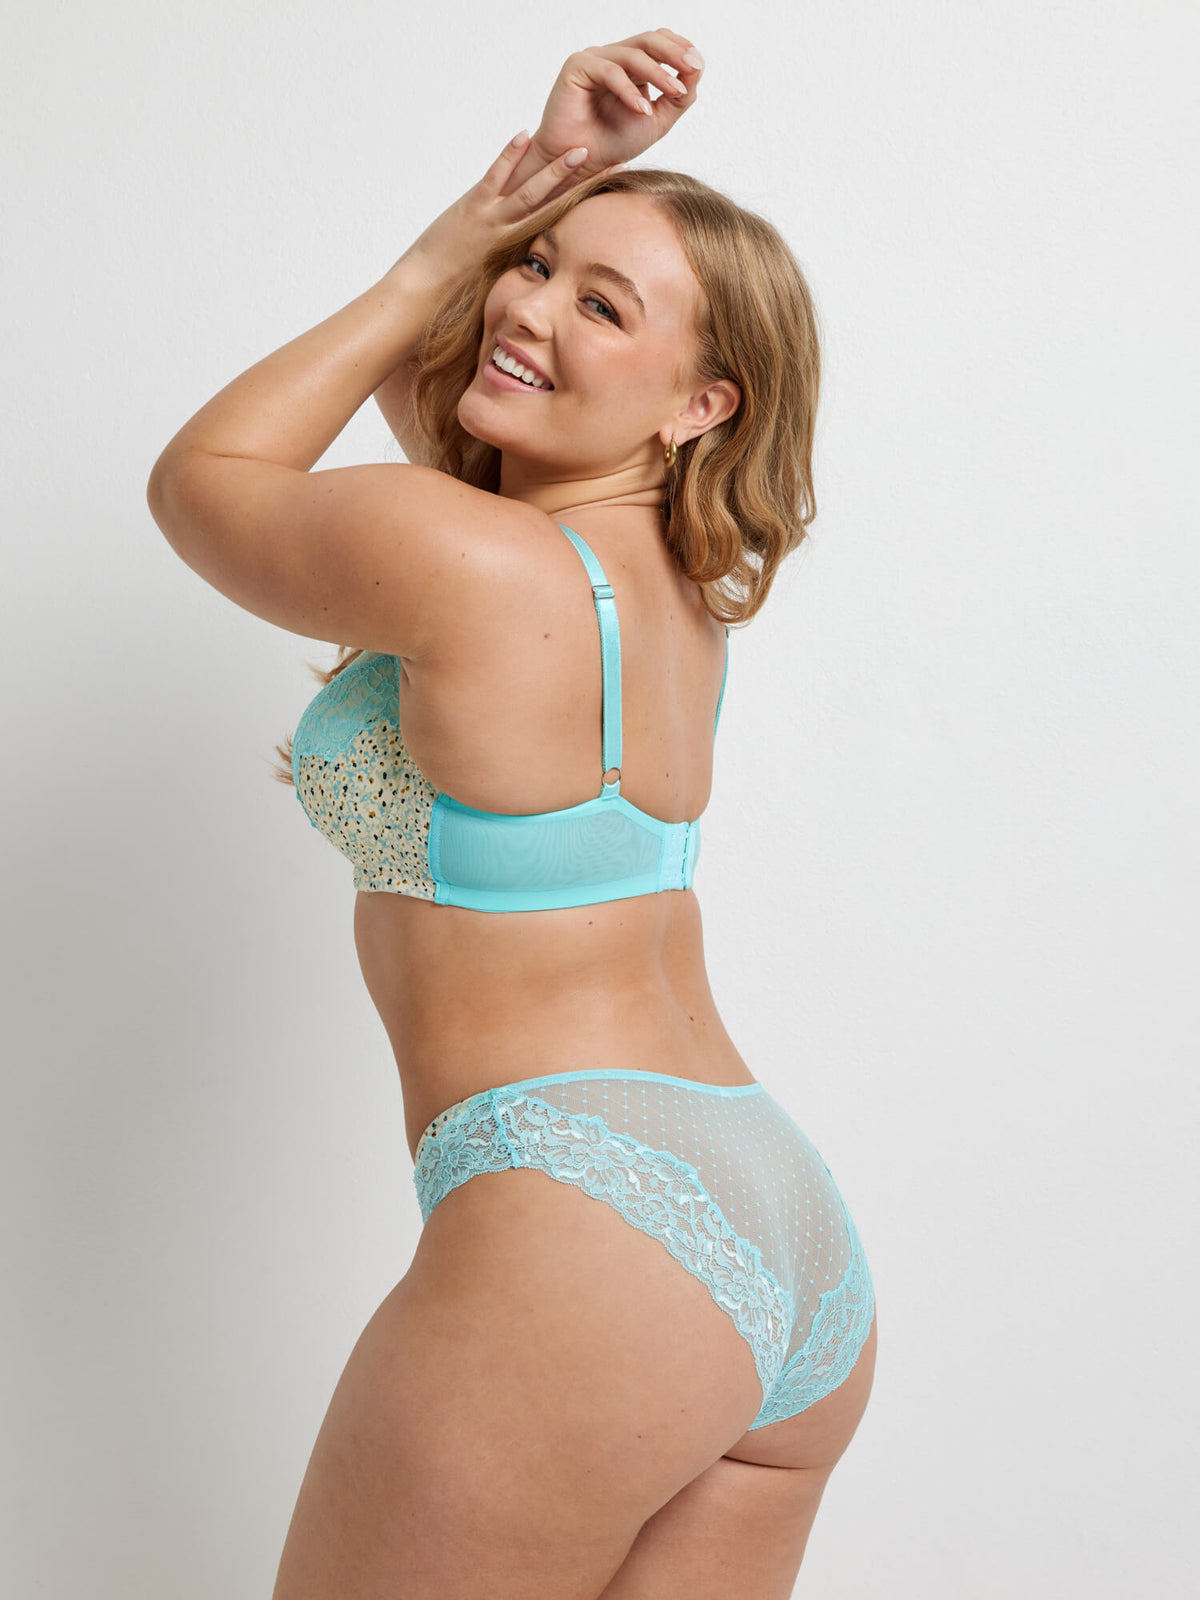 A woman wearing a cream and blue floral underwear brief with blue lace detail.